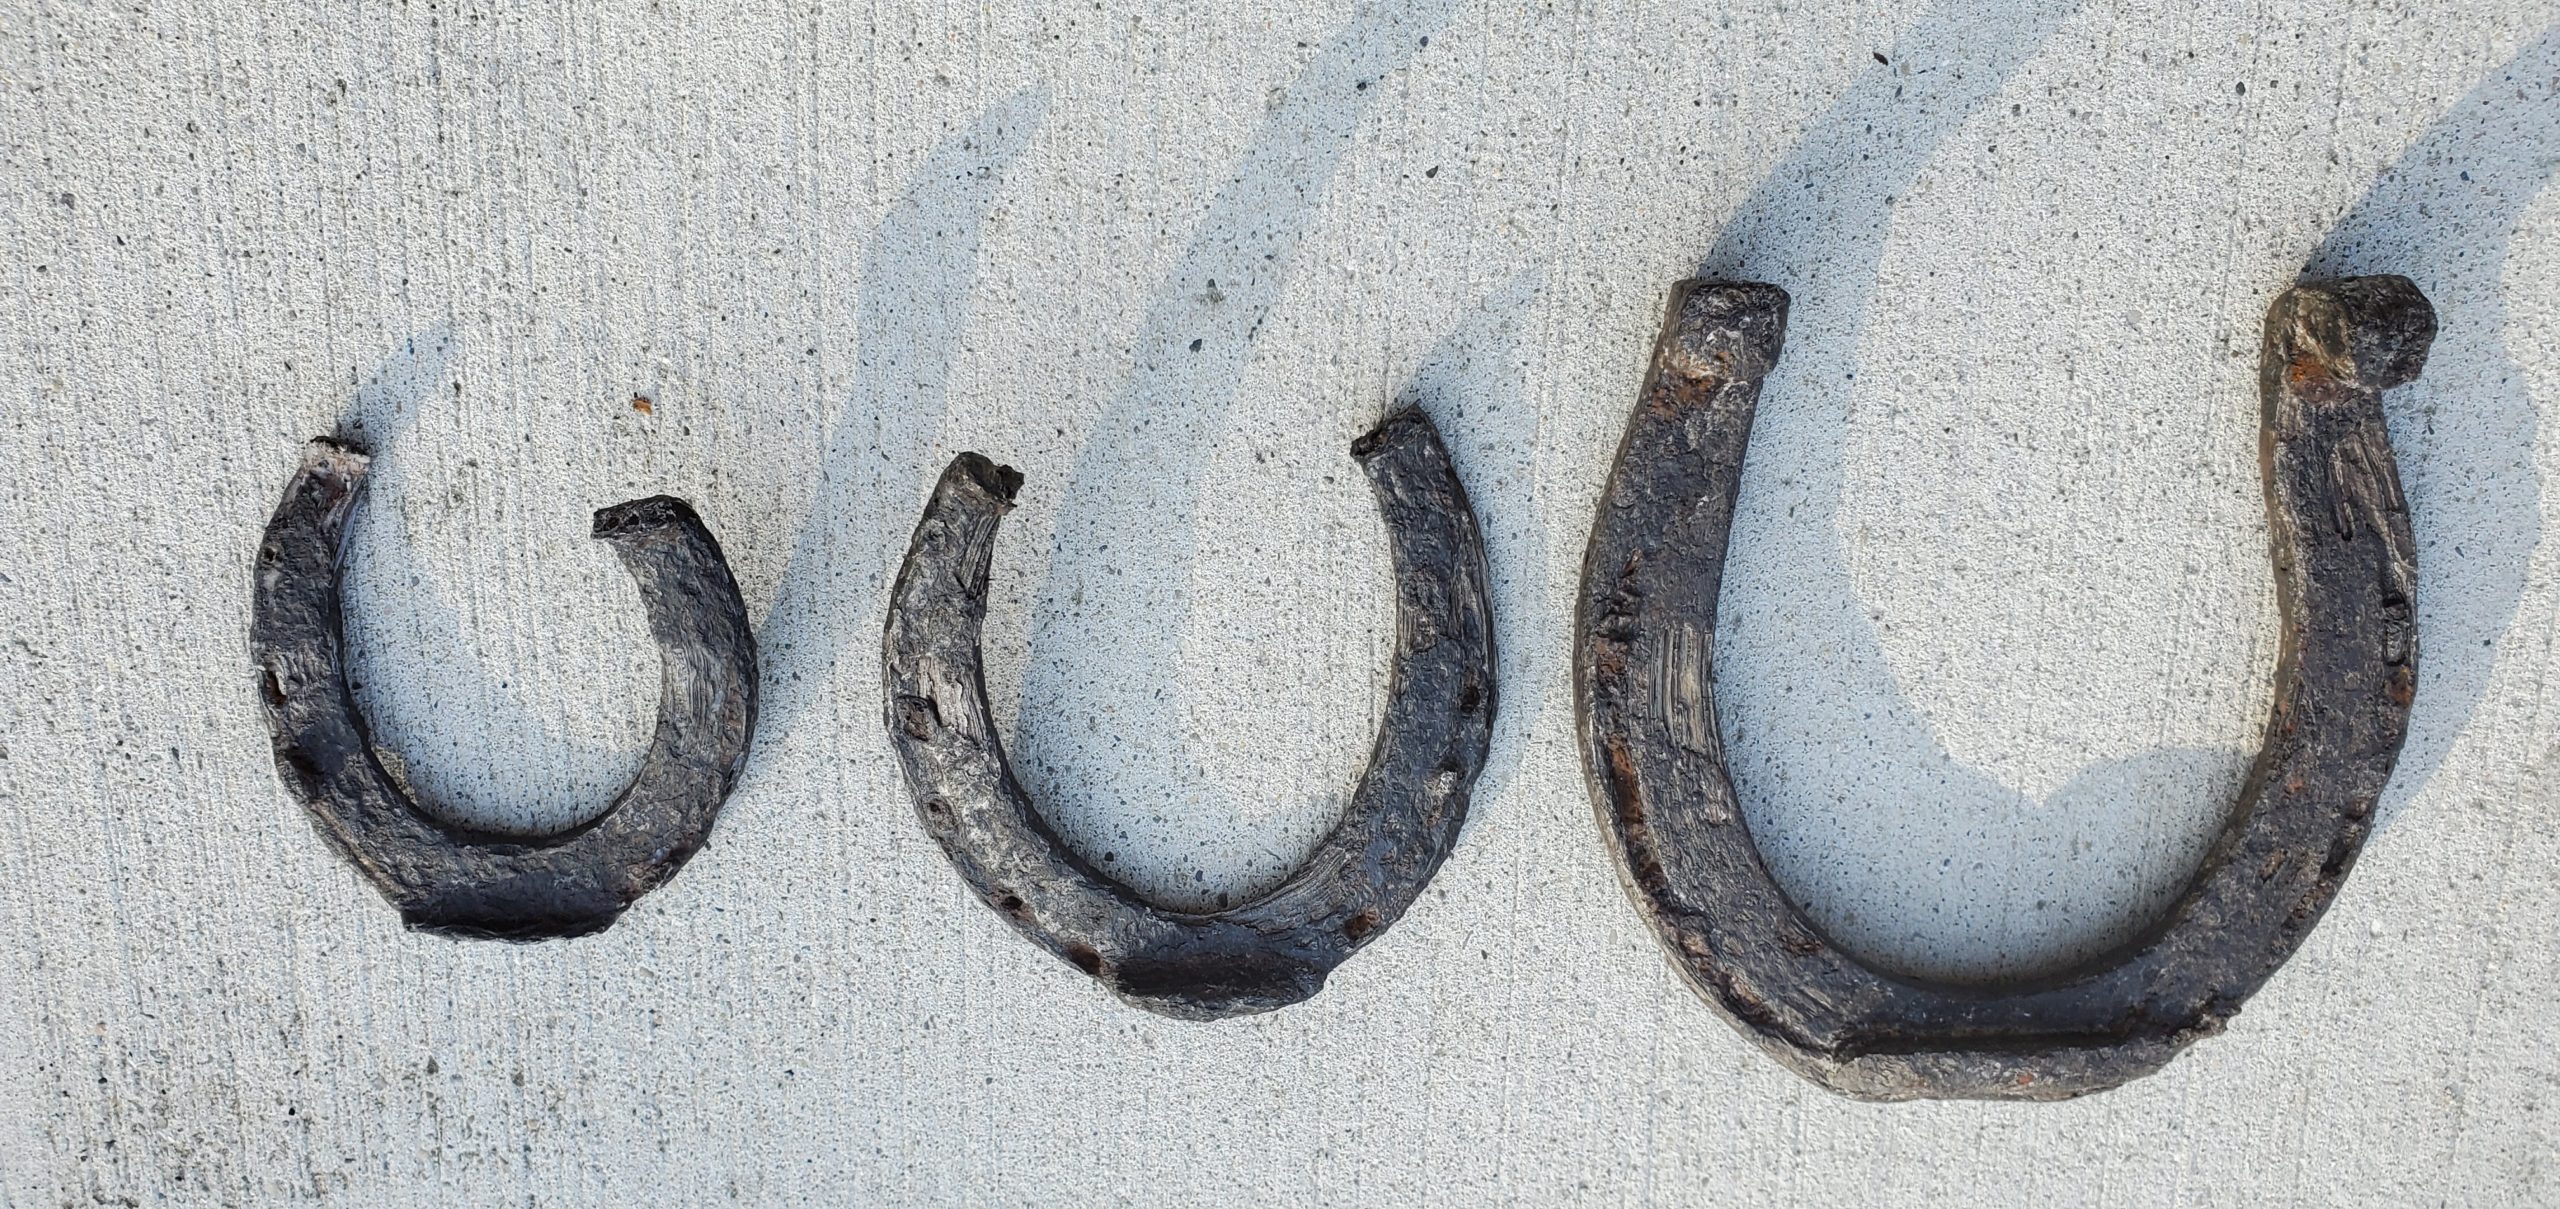 Did Horseshoes Exist Before Horses?